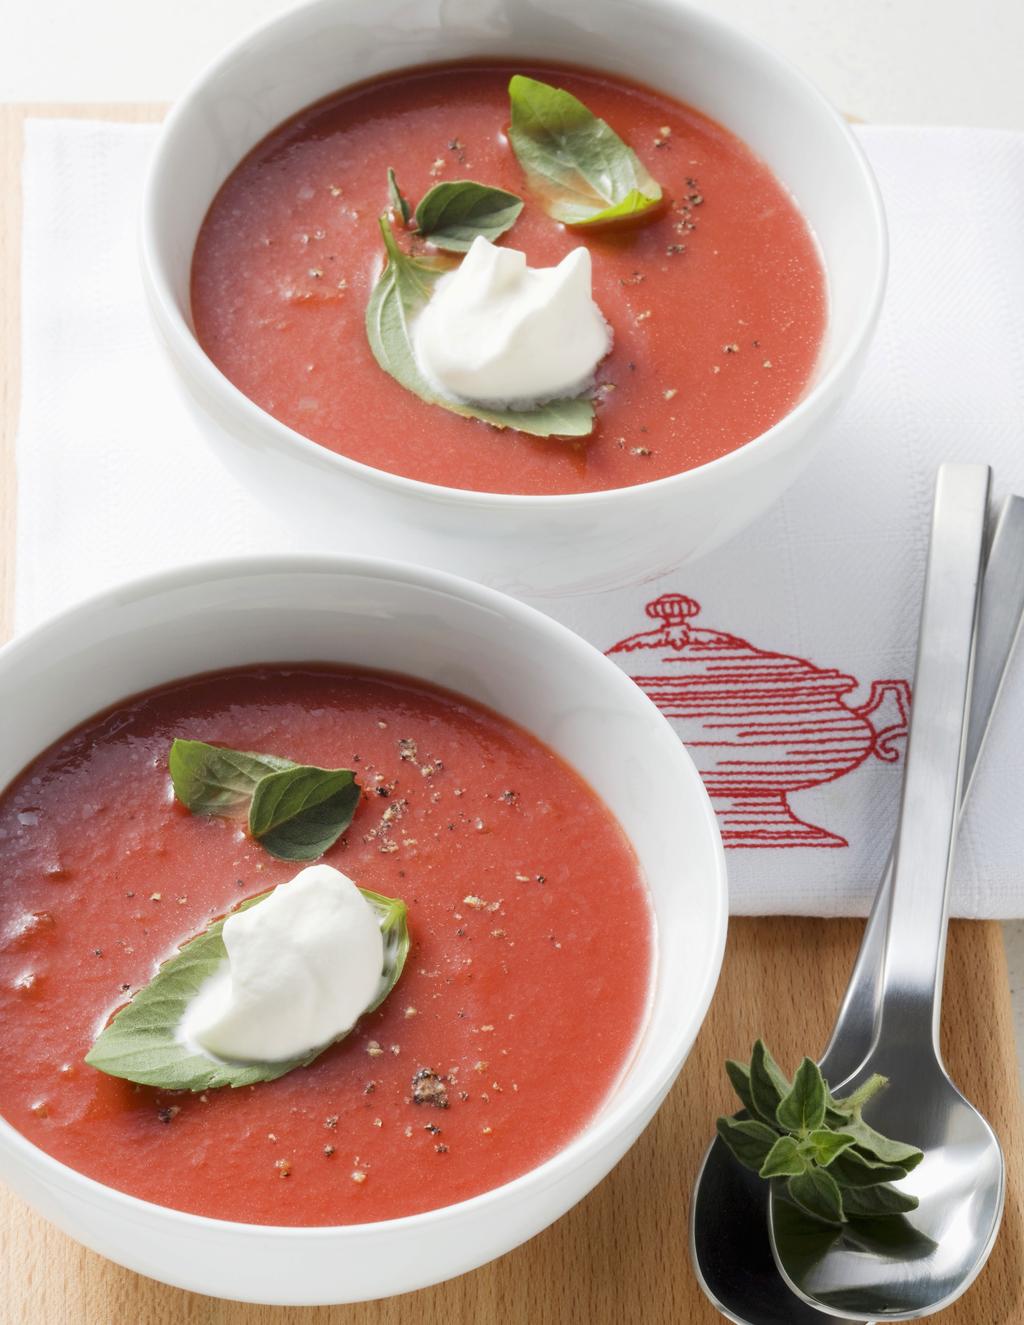 winter tomato soup Ingred ient s 2 medium yellow onions ½ cup unsalted butter 28 oz crushed tomatoes, Italian style ½ cup vermouth, or dry white wine 1 tbsp. sugar 1 tsp. tarragon 2 tsp.